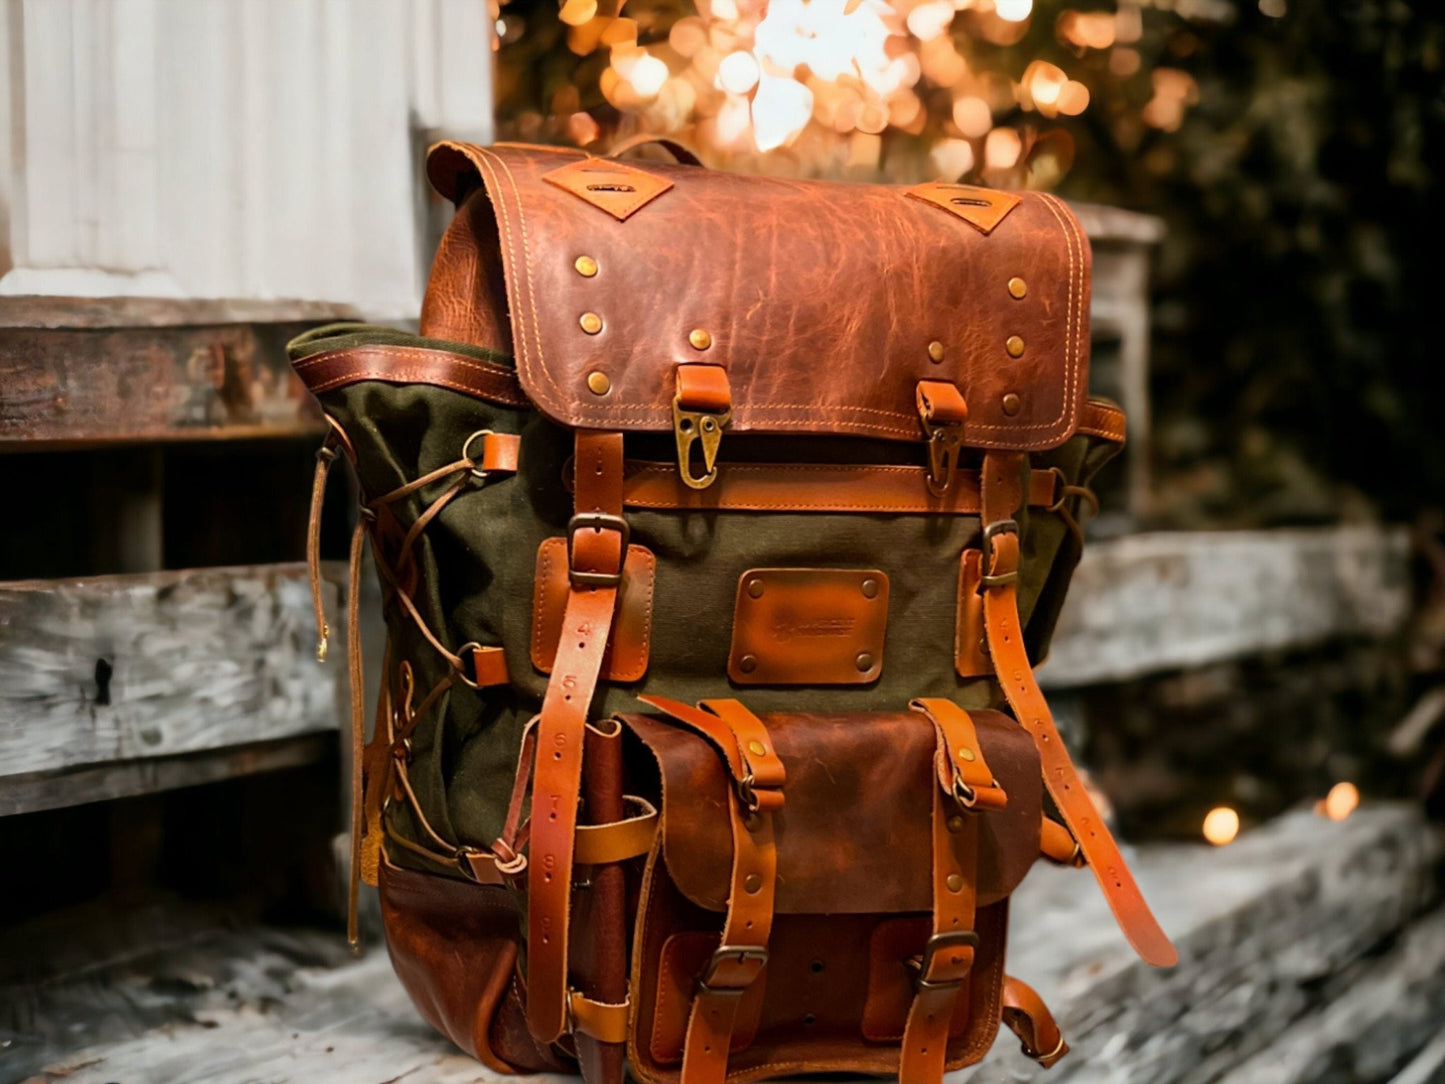 Model Name : Babylon Green | Custom Leather-Canvas Backpack with Leather Flap, You can Redesign-Customize the item | 30 Liter to 80 Liter Options (Many variants Photos) bushcraft - camping - hiking backpack 99percenthandmade   